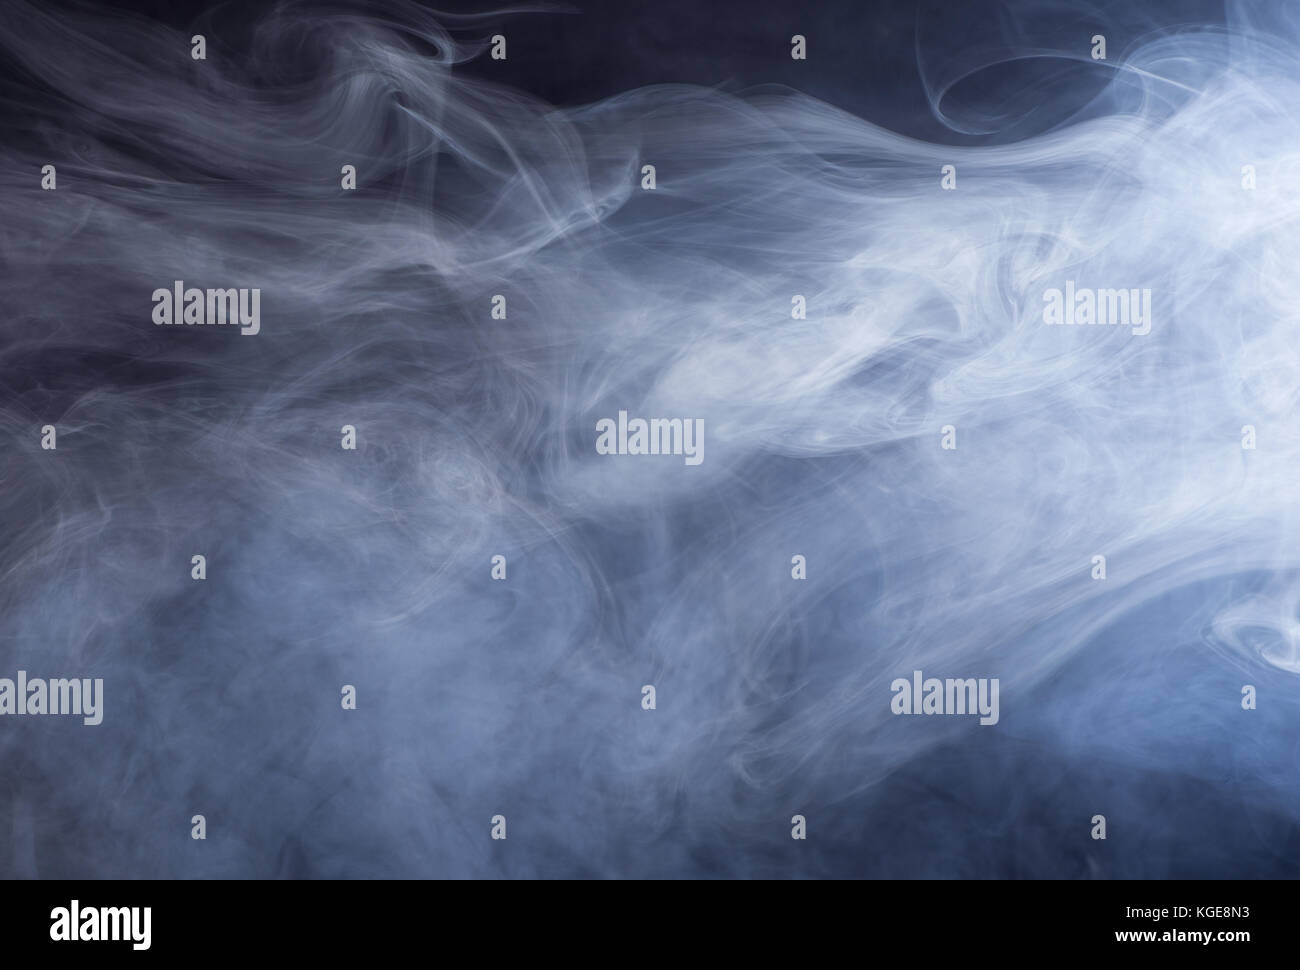 Swirling glowing smoke for an abstract background Stock Photo